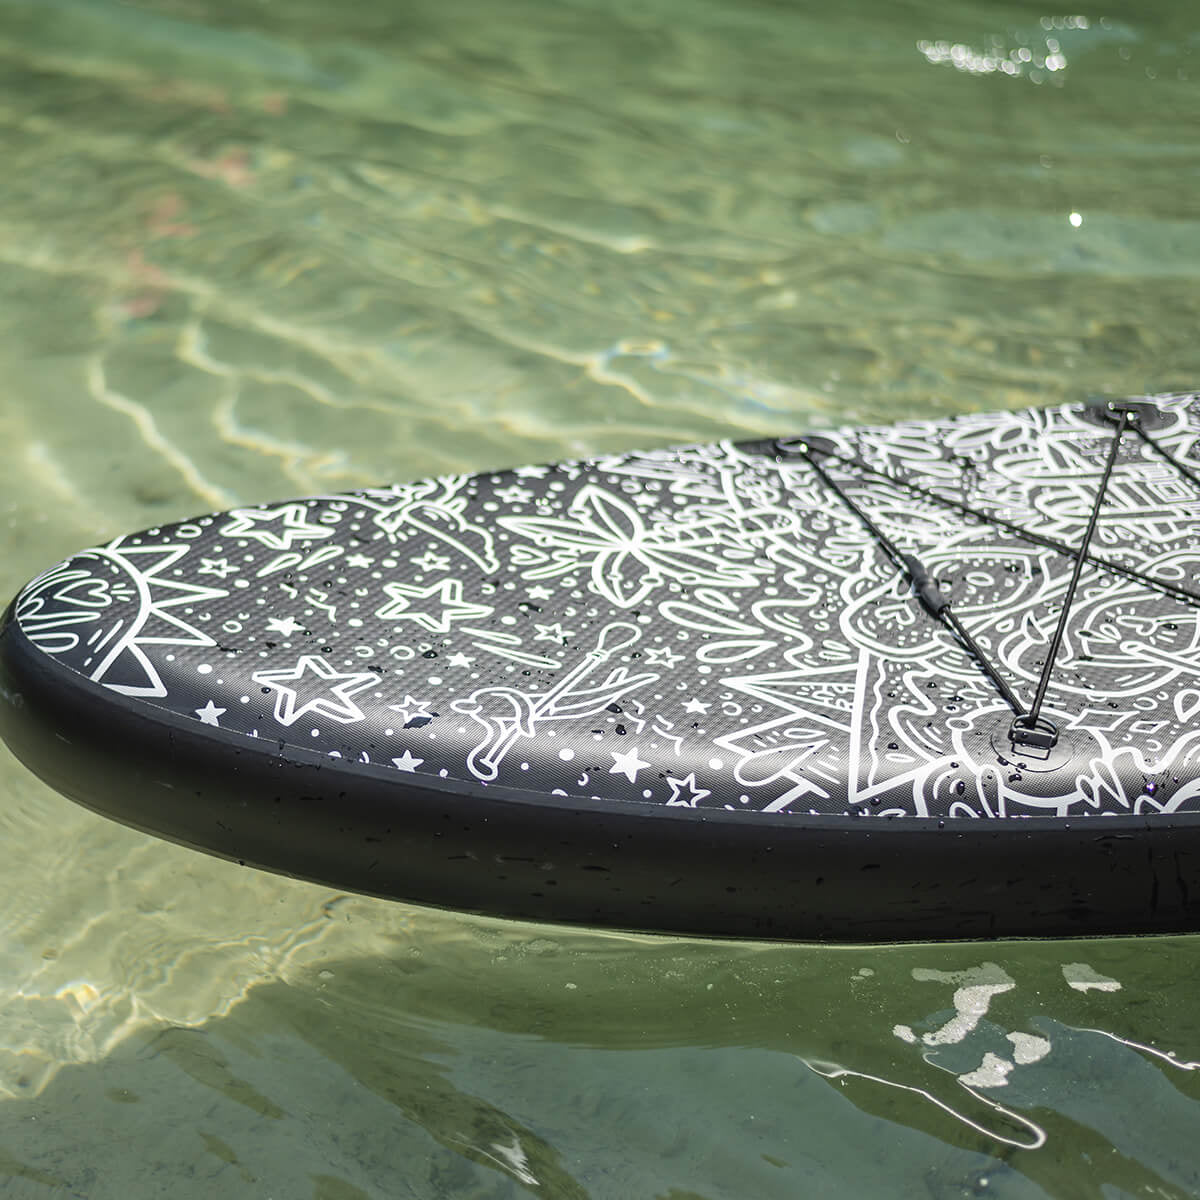 Stand Up Paddle Jbay.Zone FRA! Special Edition Black